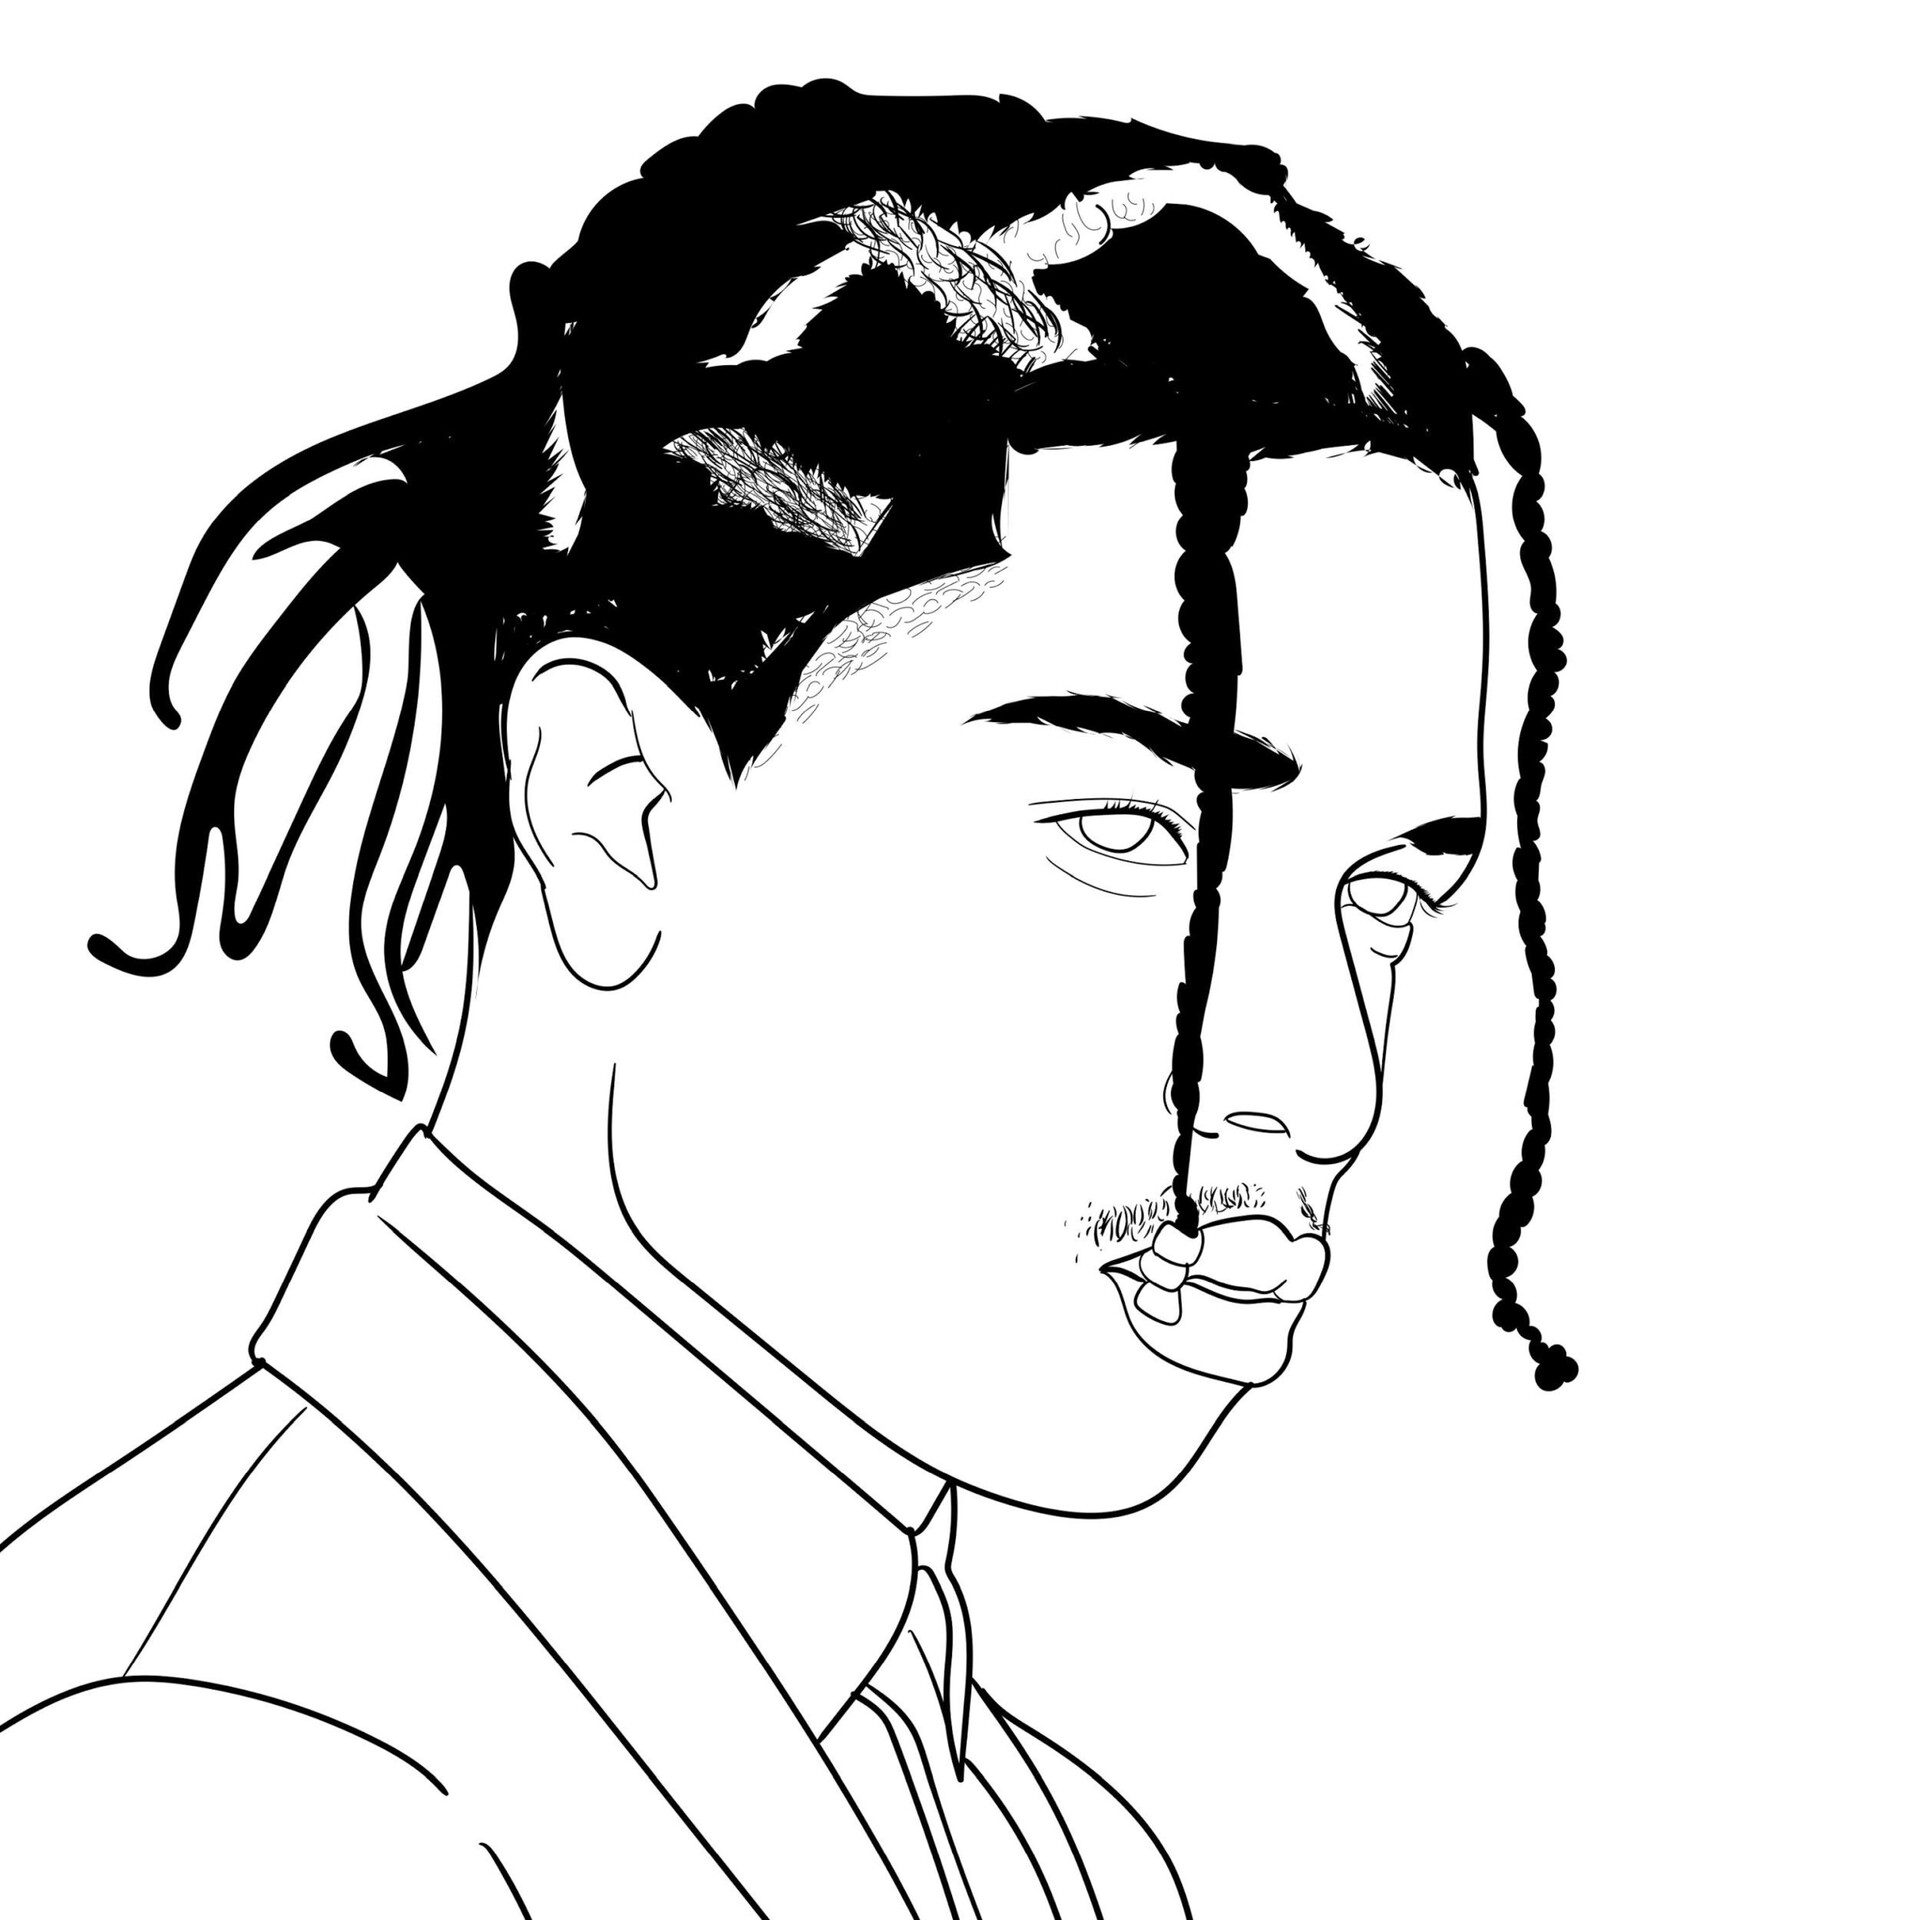 ASAP Rocky Coloring Pages - Coloring Nation